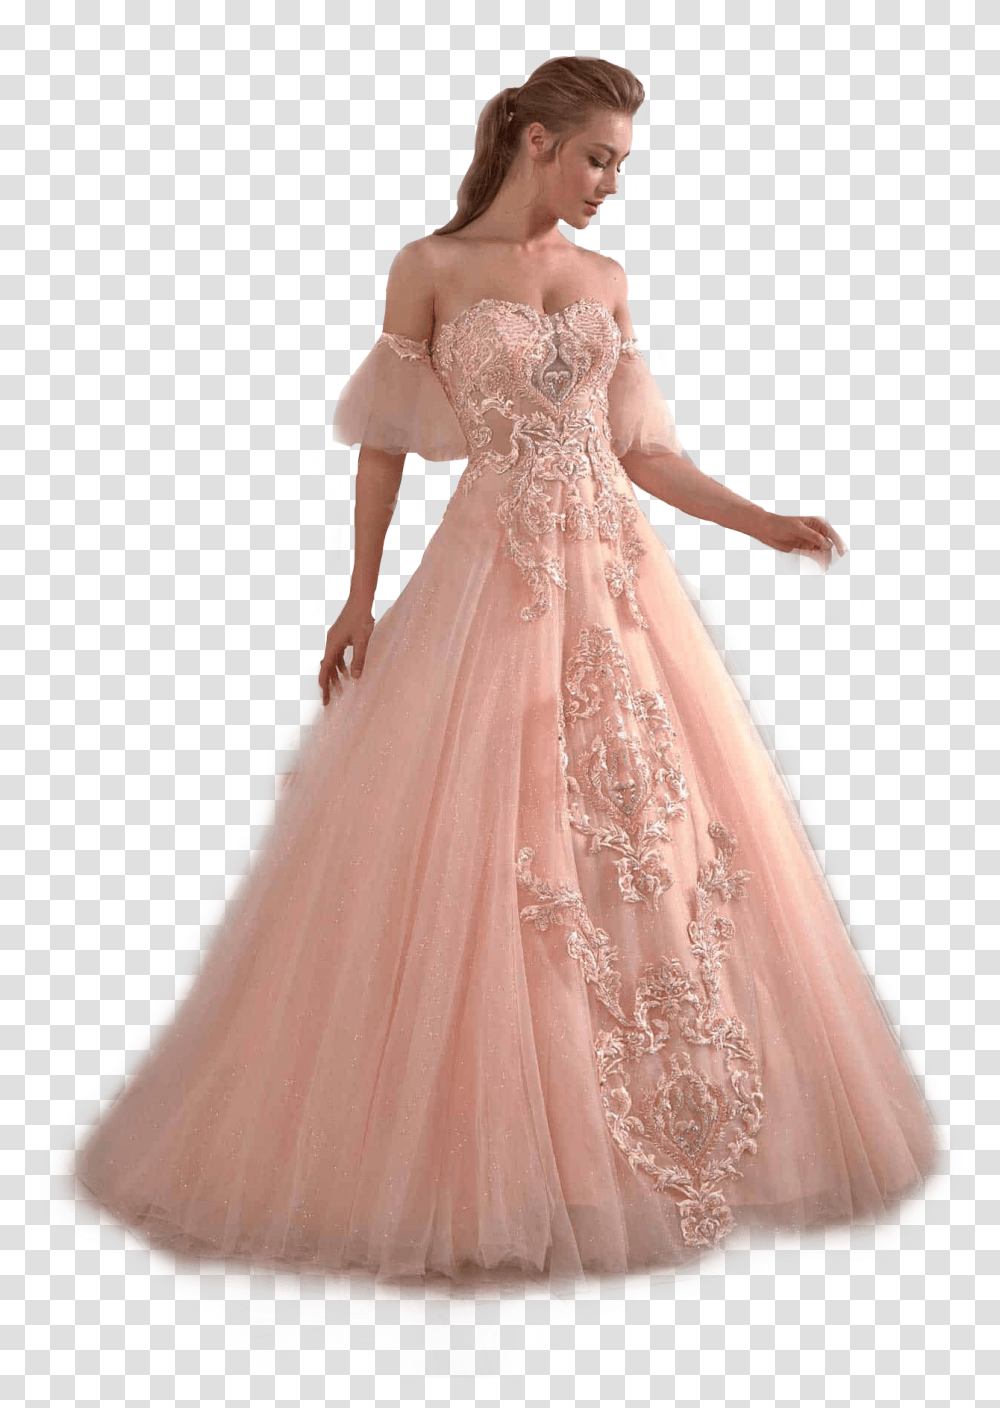 Prom Dress Pink Formal Gown Pinkaesthetic Aesthetic Gown, Clothing, Apparel, Wedding Gown, Robe Transparent Png